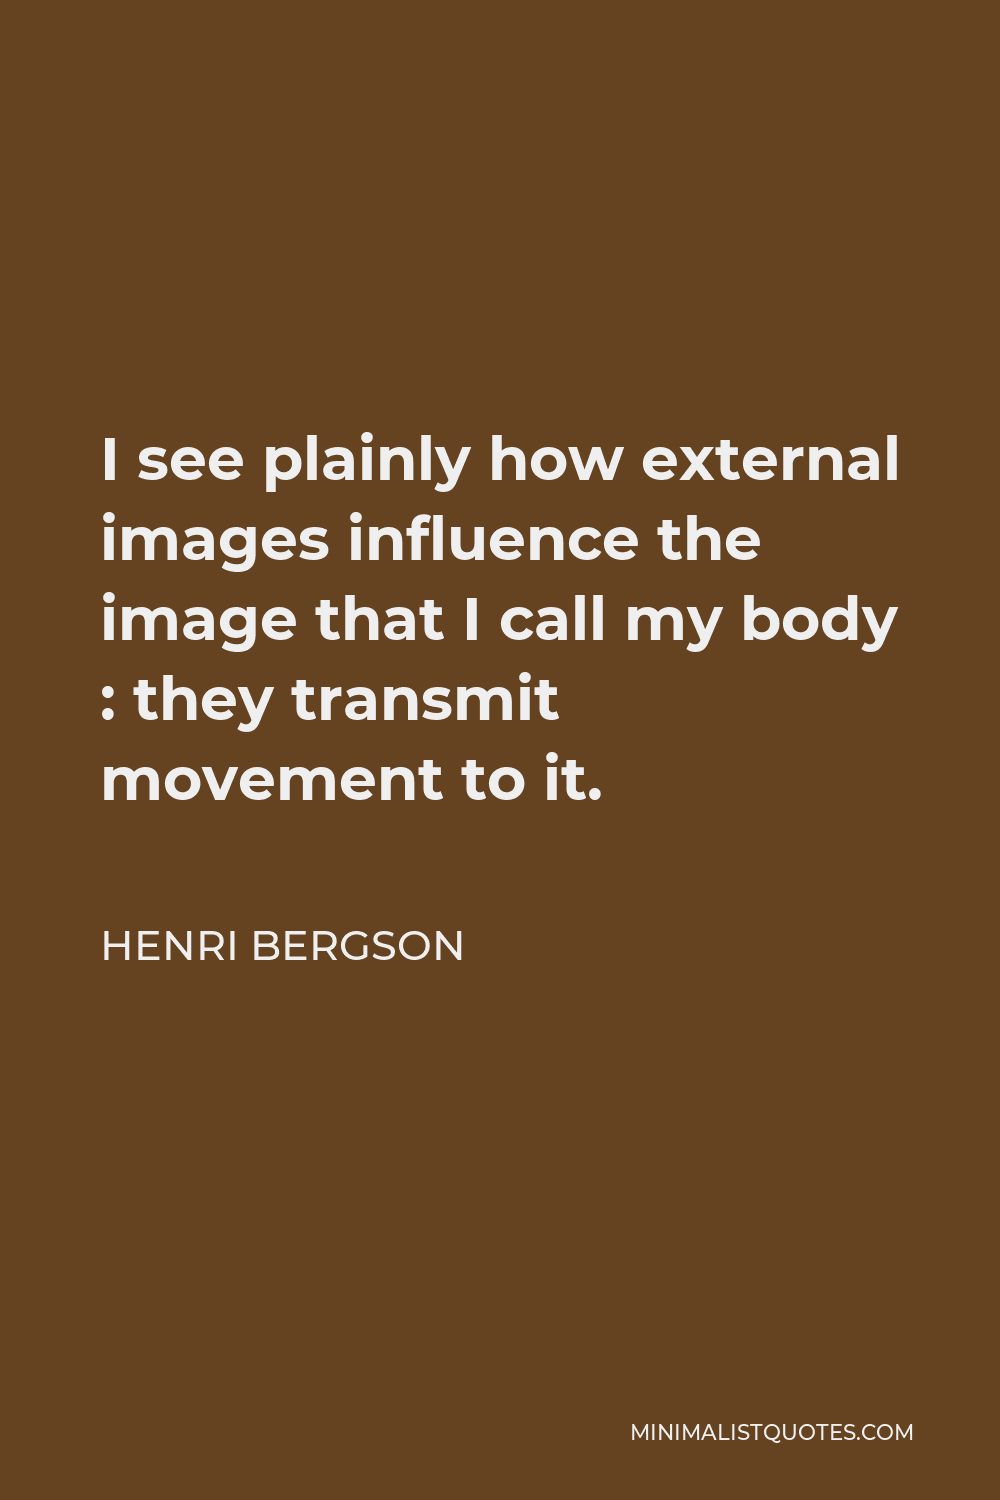 Henri Bergson Quote - I see plainly how external images influence the image that I call my body : they transmit movement to it.